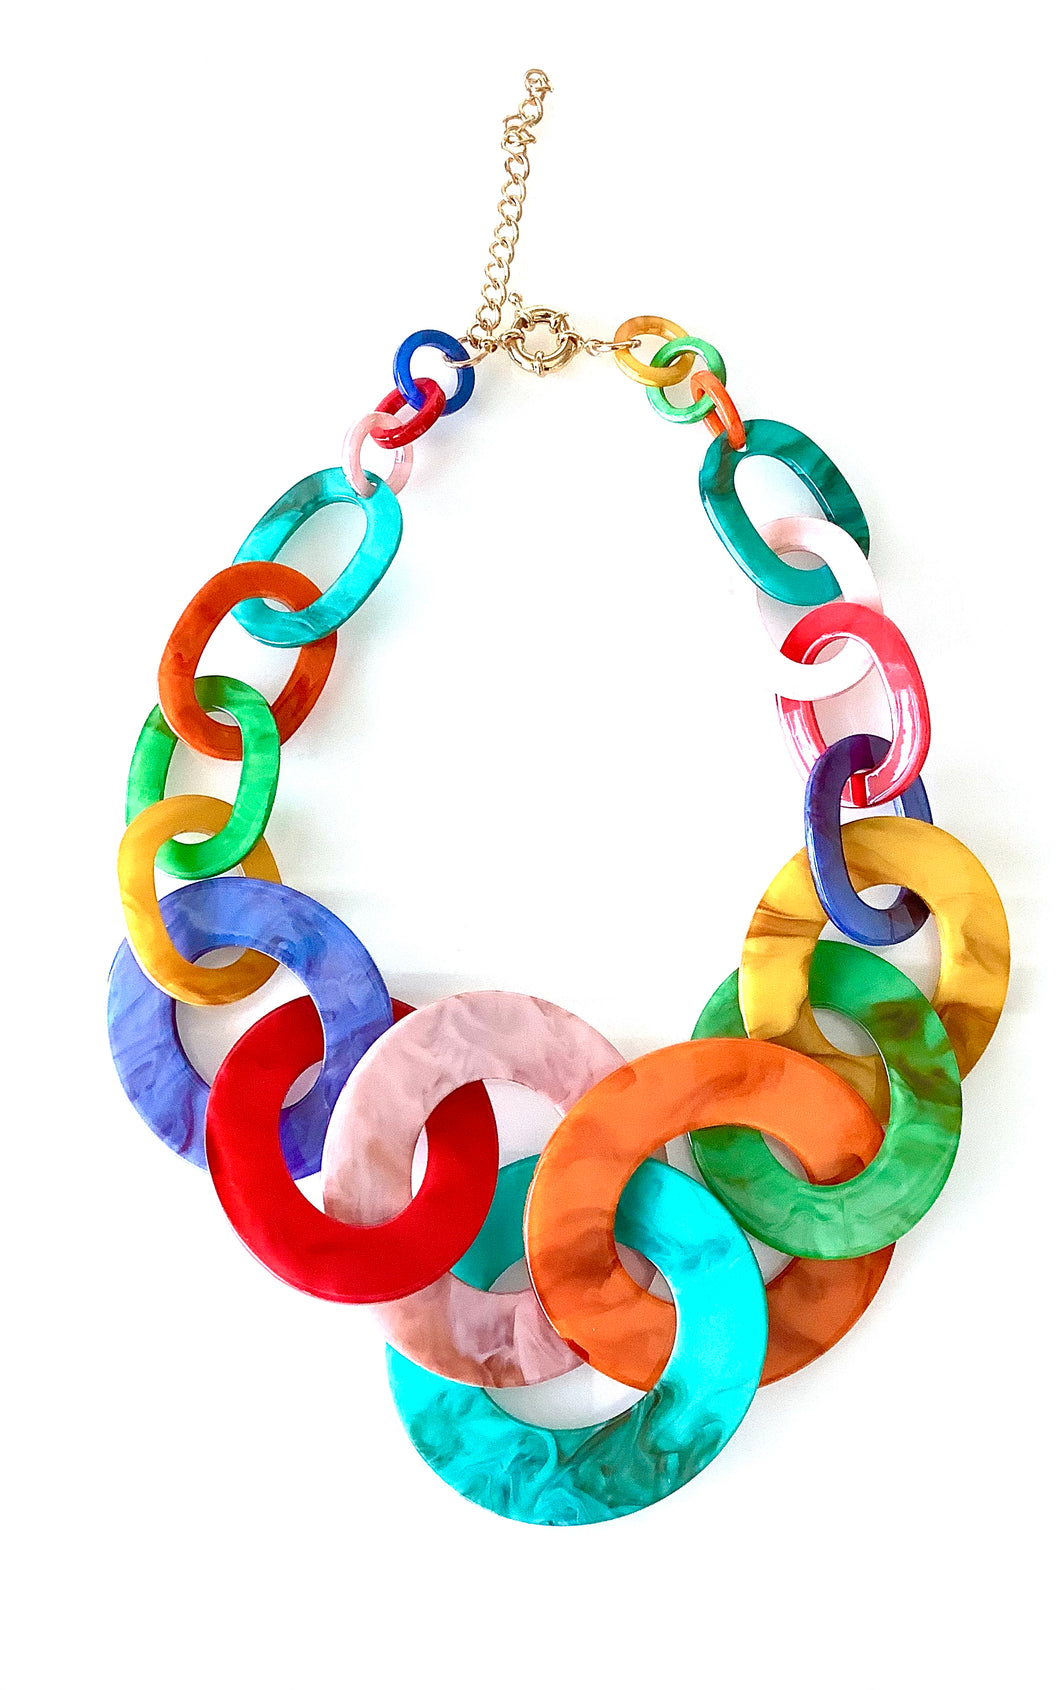 Multi-Coloured Resin Chain Statement Necklace